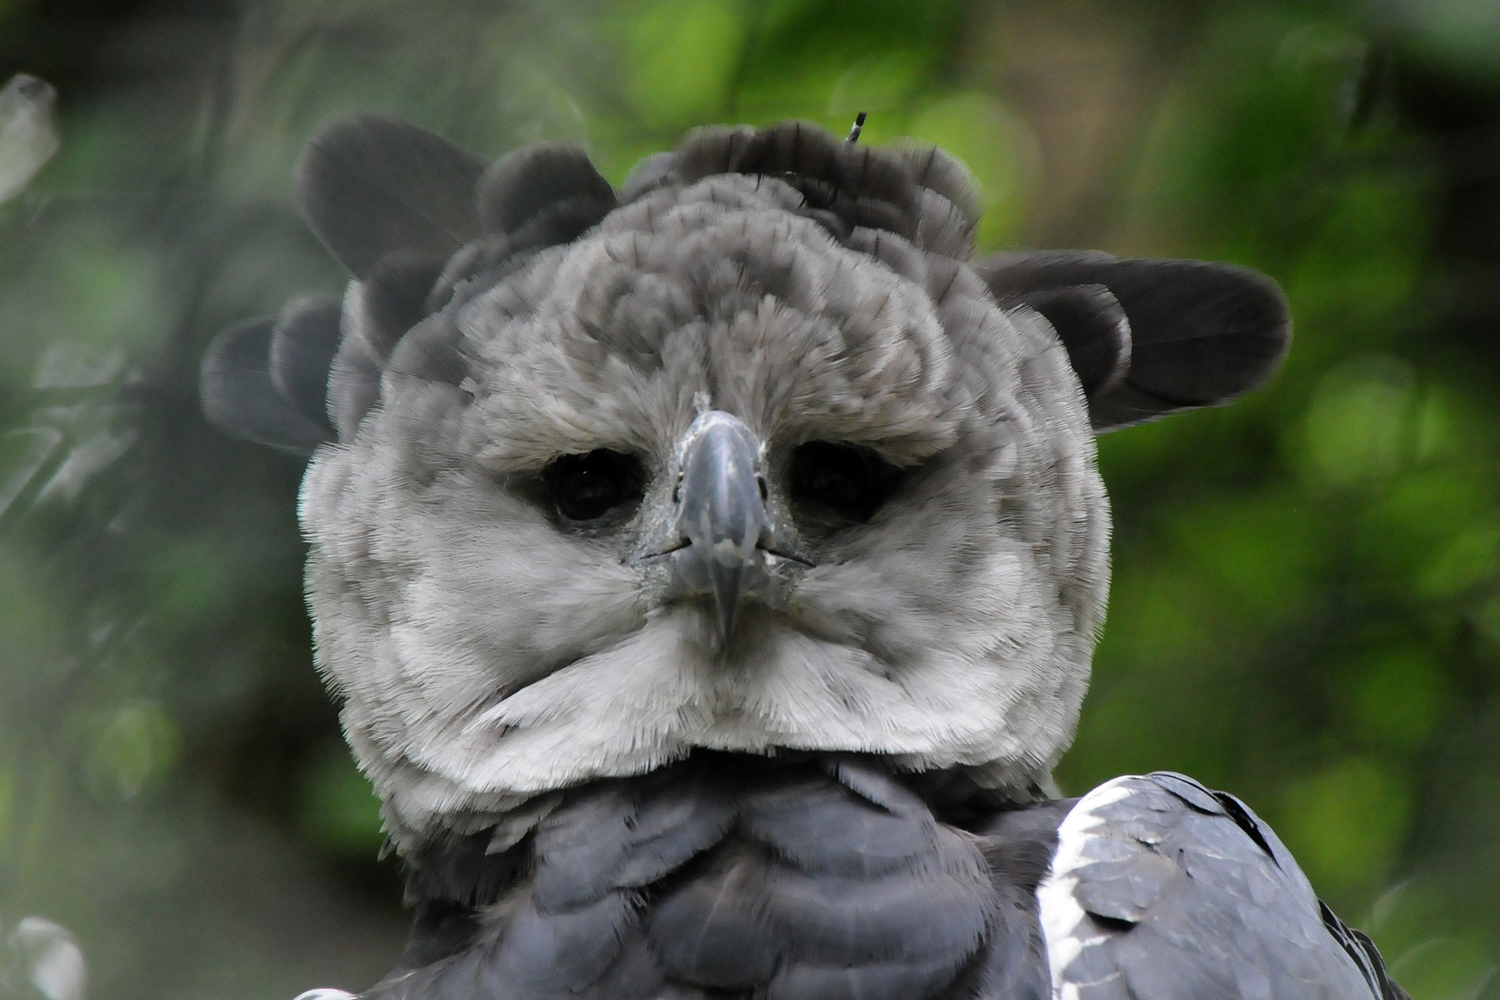 The Harpy Eagle Is a Huge, Powerful Hunter